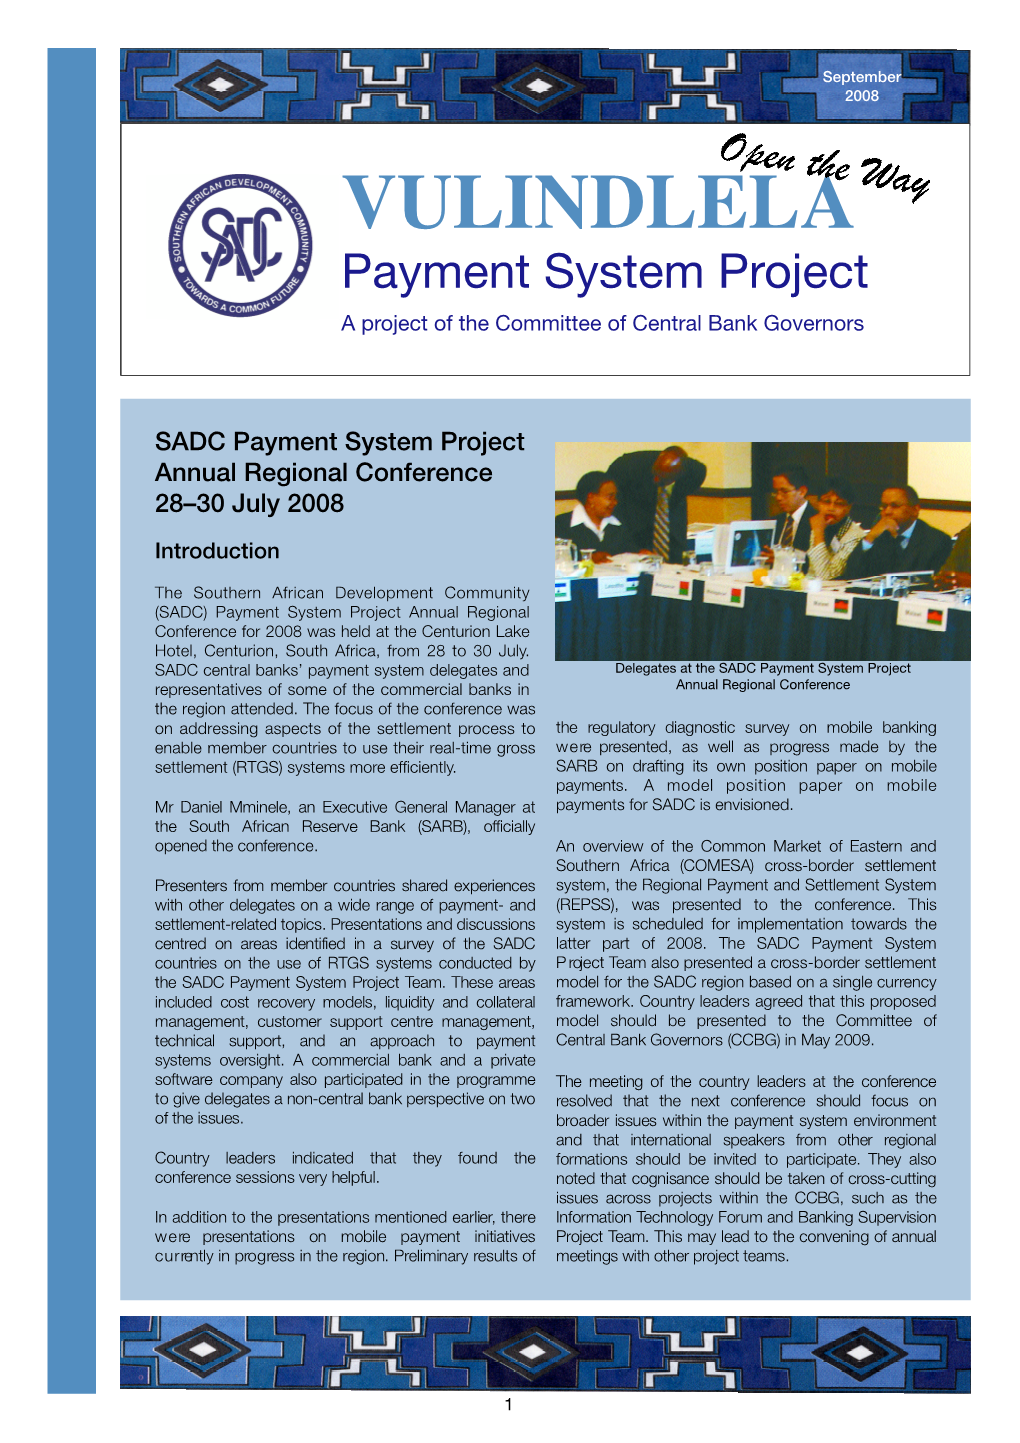 VULINDLELA Payment System Project a Project of the Committee of Central Bank Governors